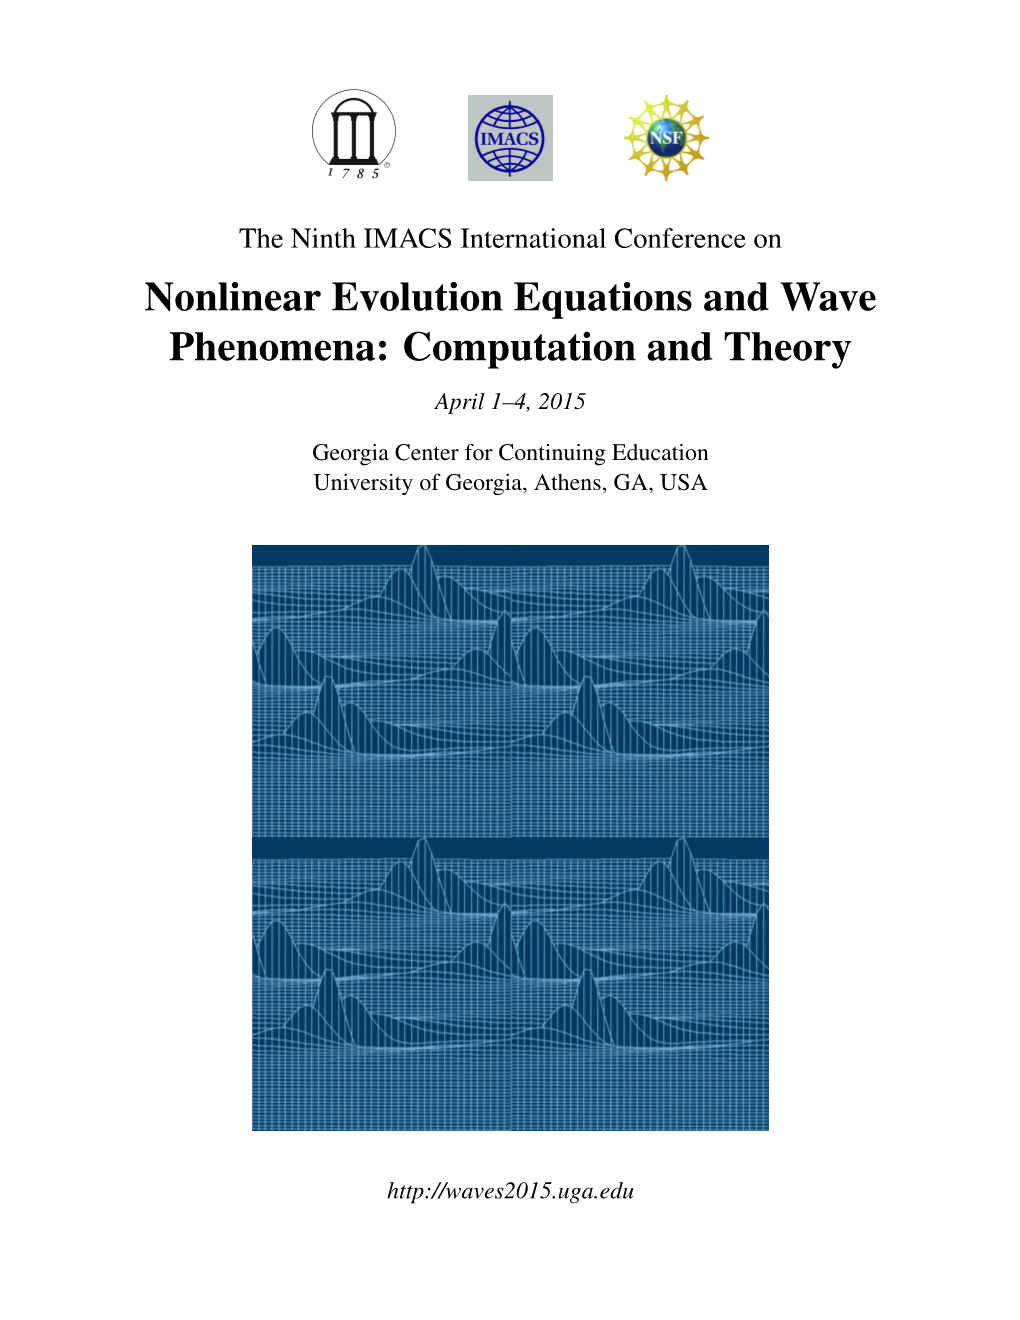 Nonlinear Evolution Equations and Wave Phenomena: Computation and Theory April 1–4, 2015